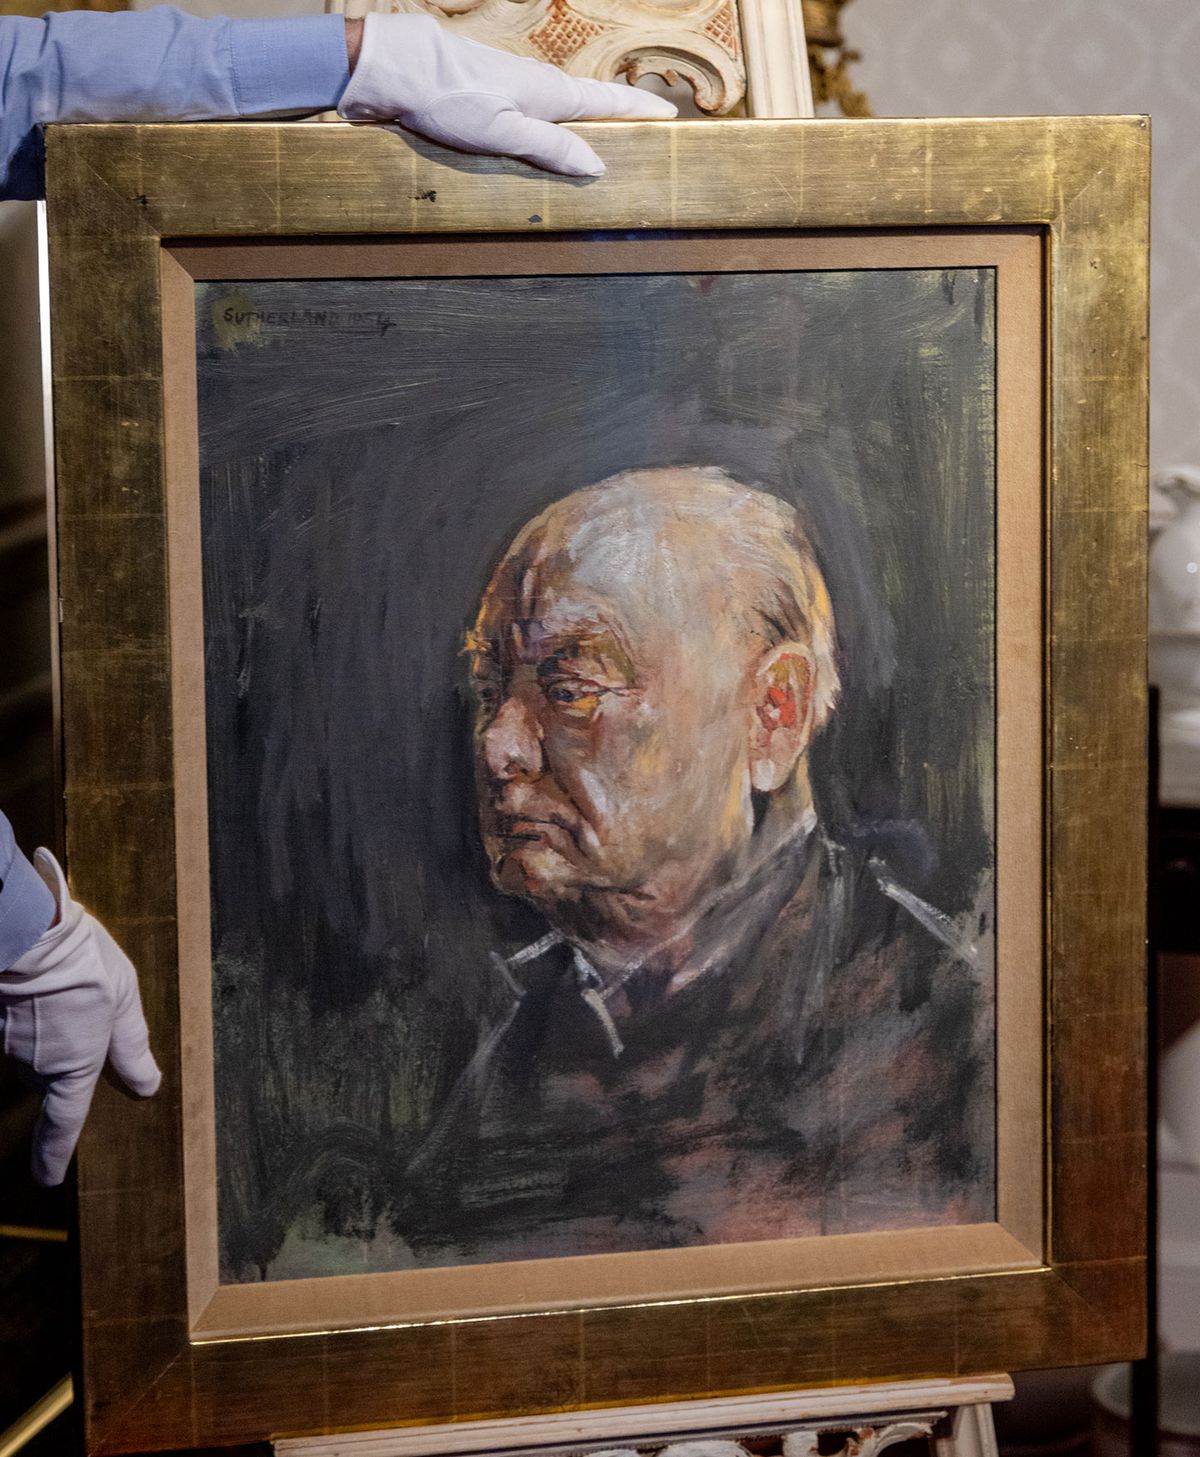 Sutherland's 1954 study of Winston Churchill is on show this week at his birthplace, Blenheim Palace, in Oxfordshire Courtesy Sotheby's